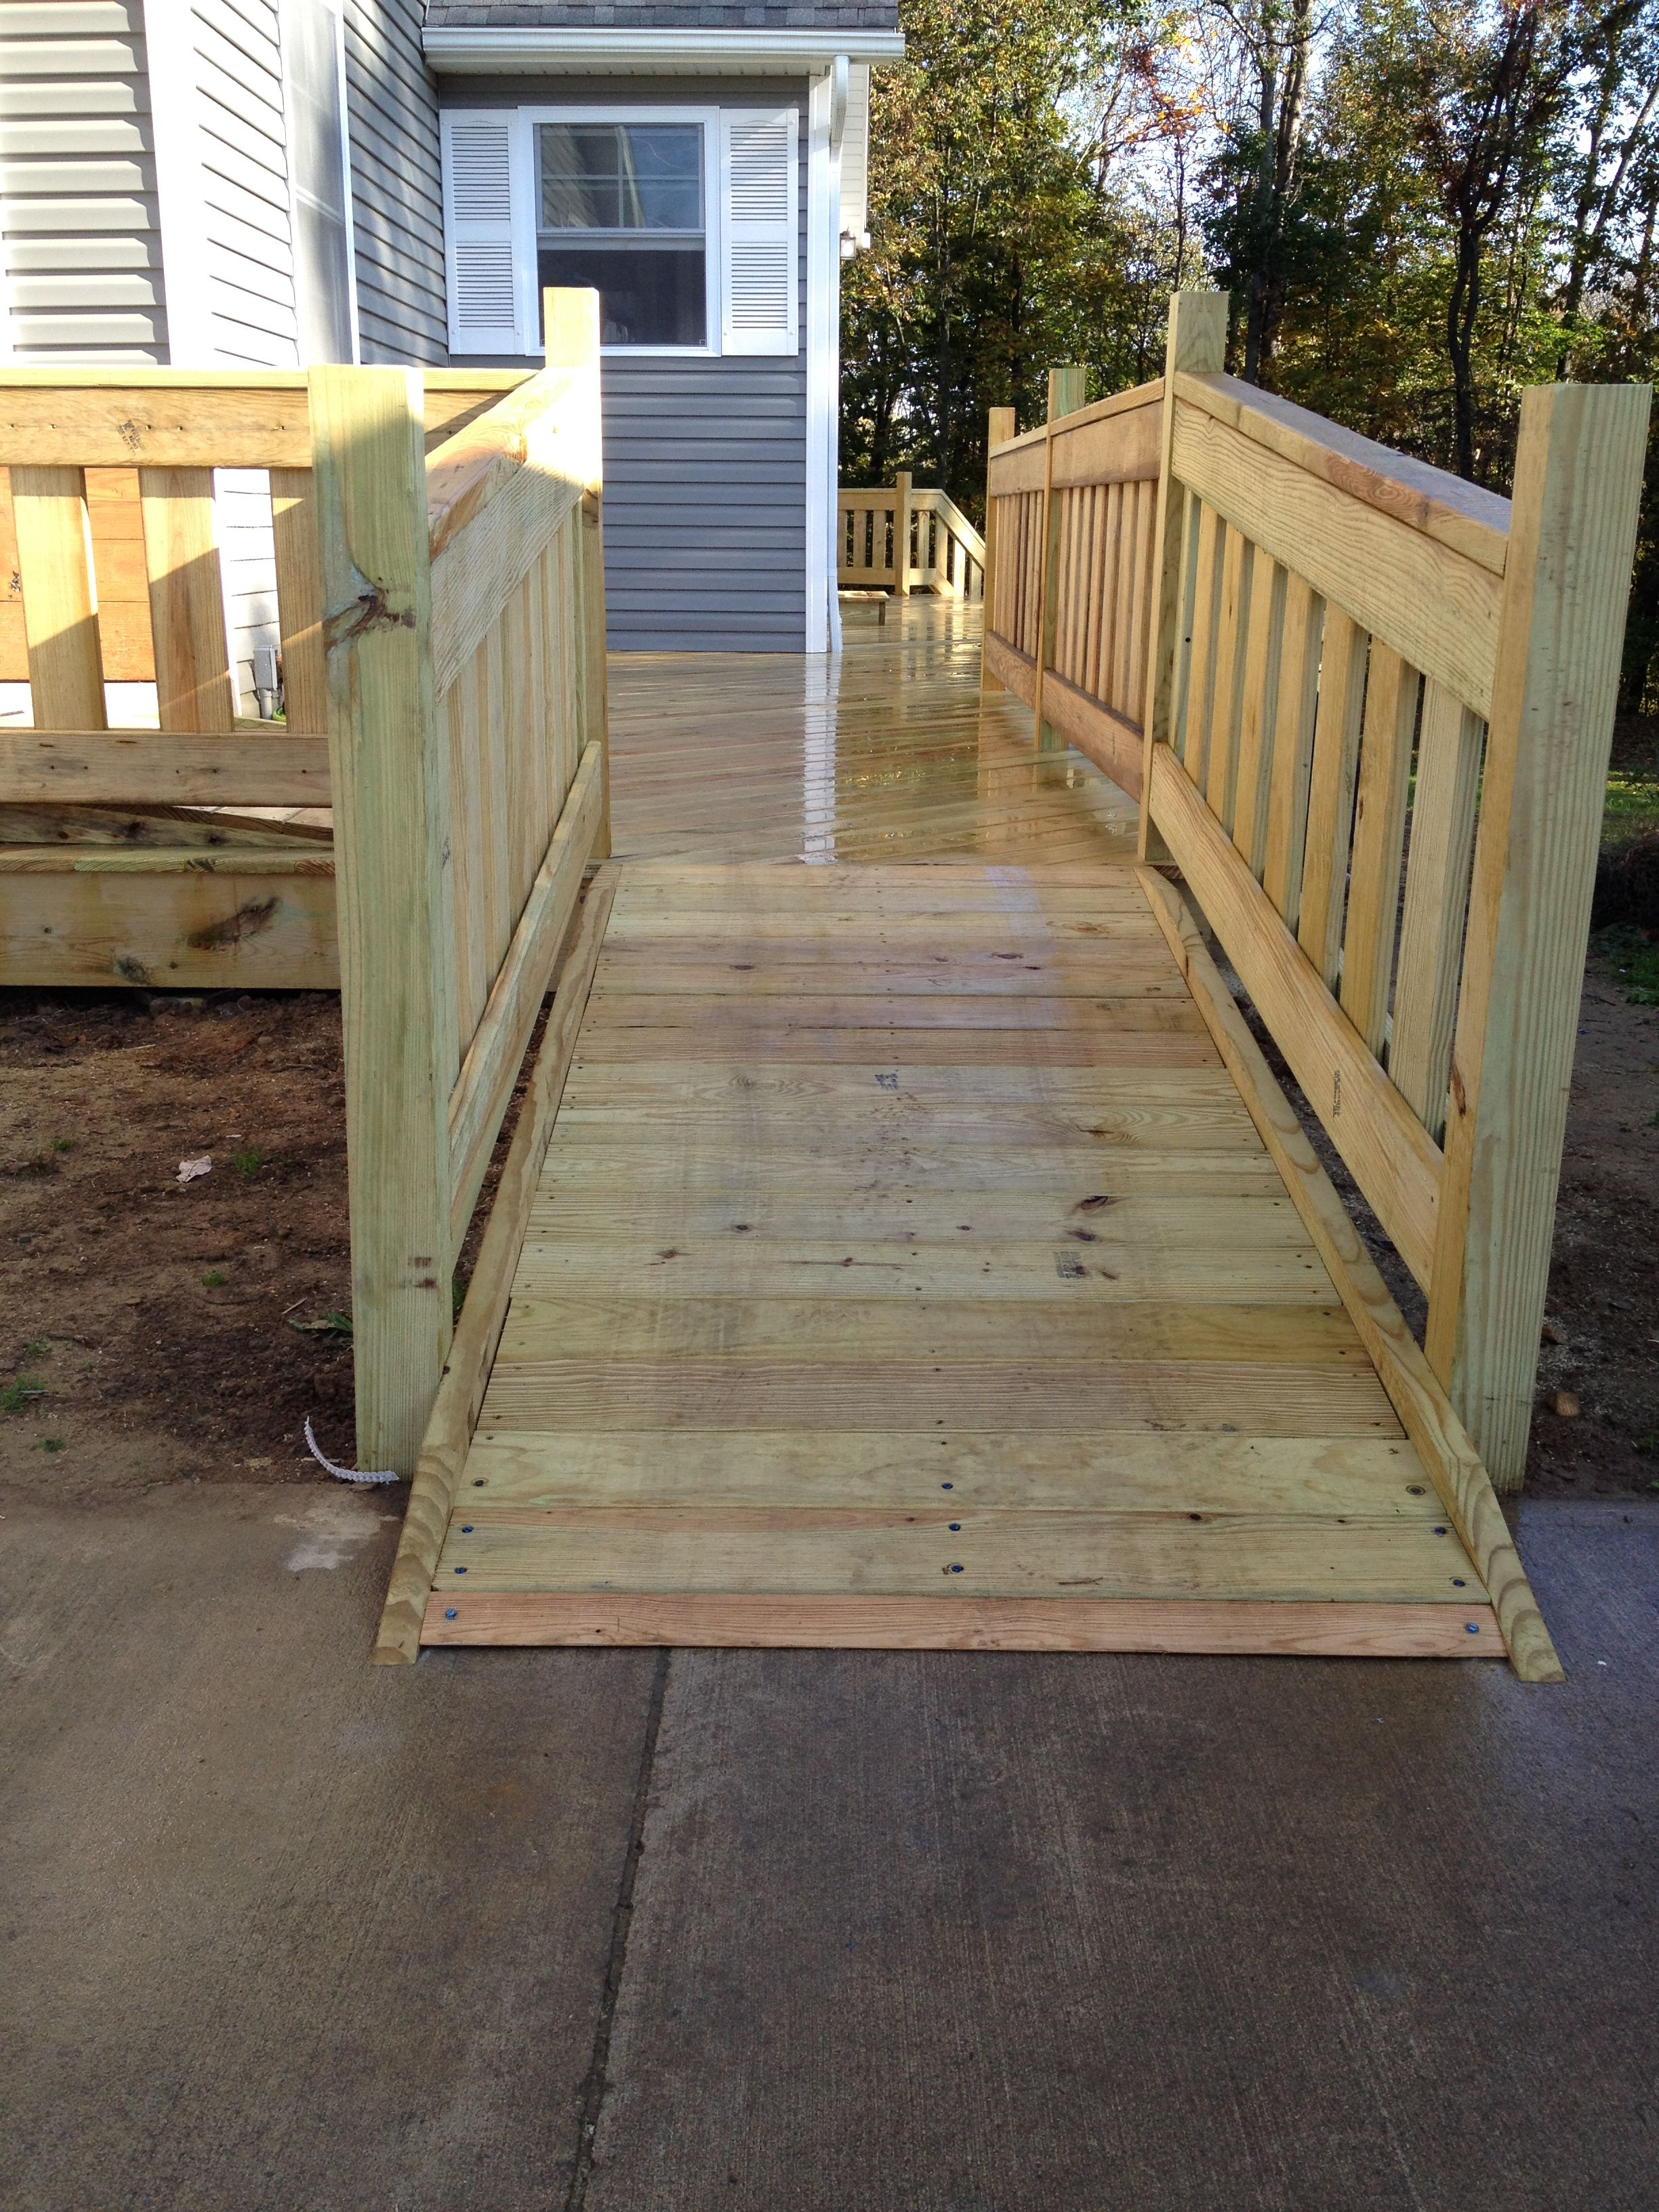 Custom Treated Lumber Handicap Ramp And Railings For The Deck throughout size 2448 X 3264